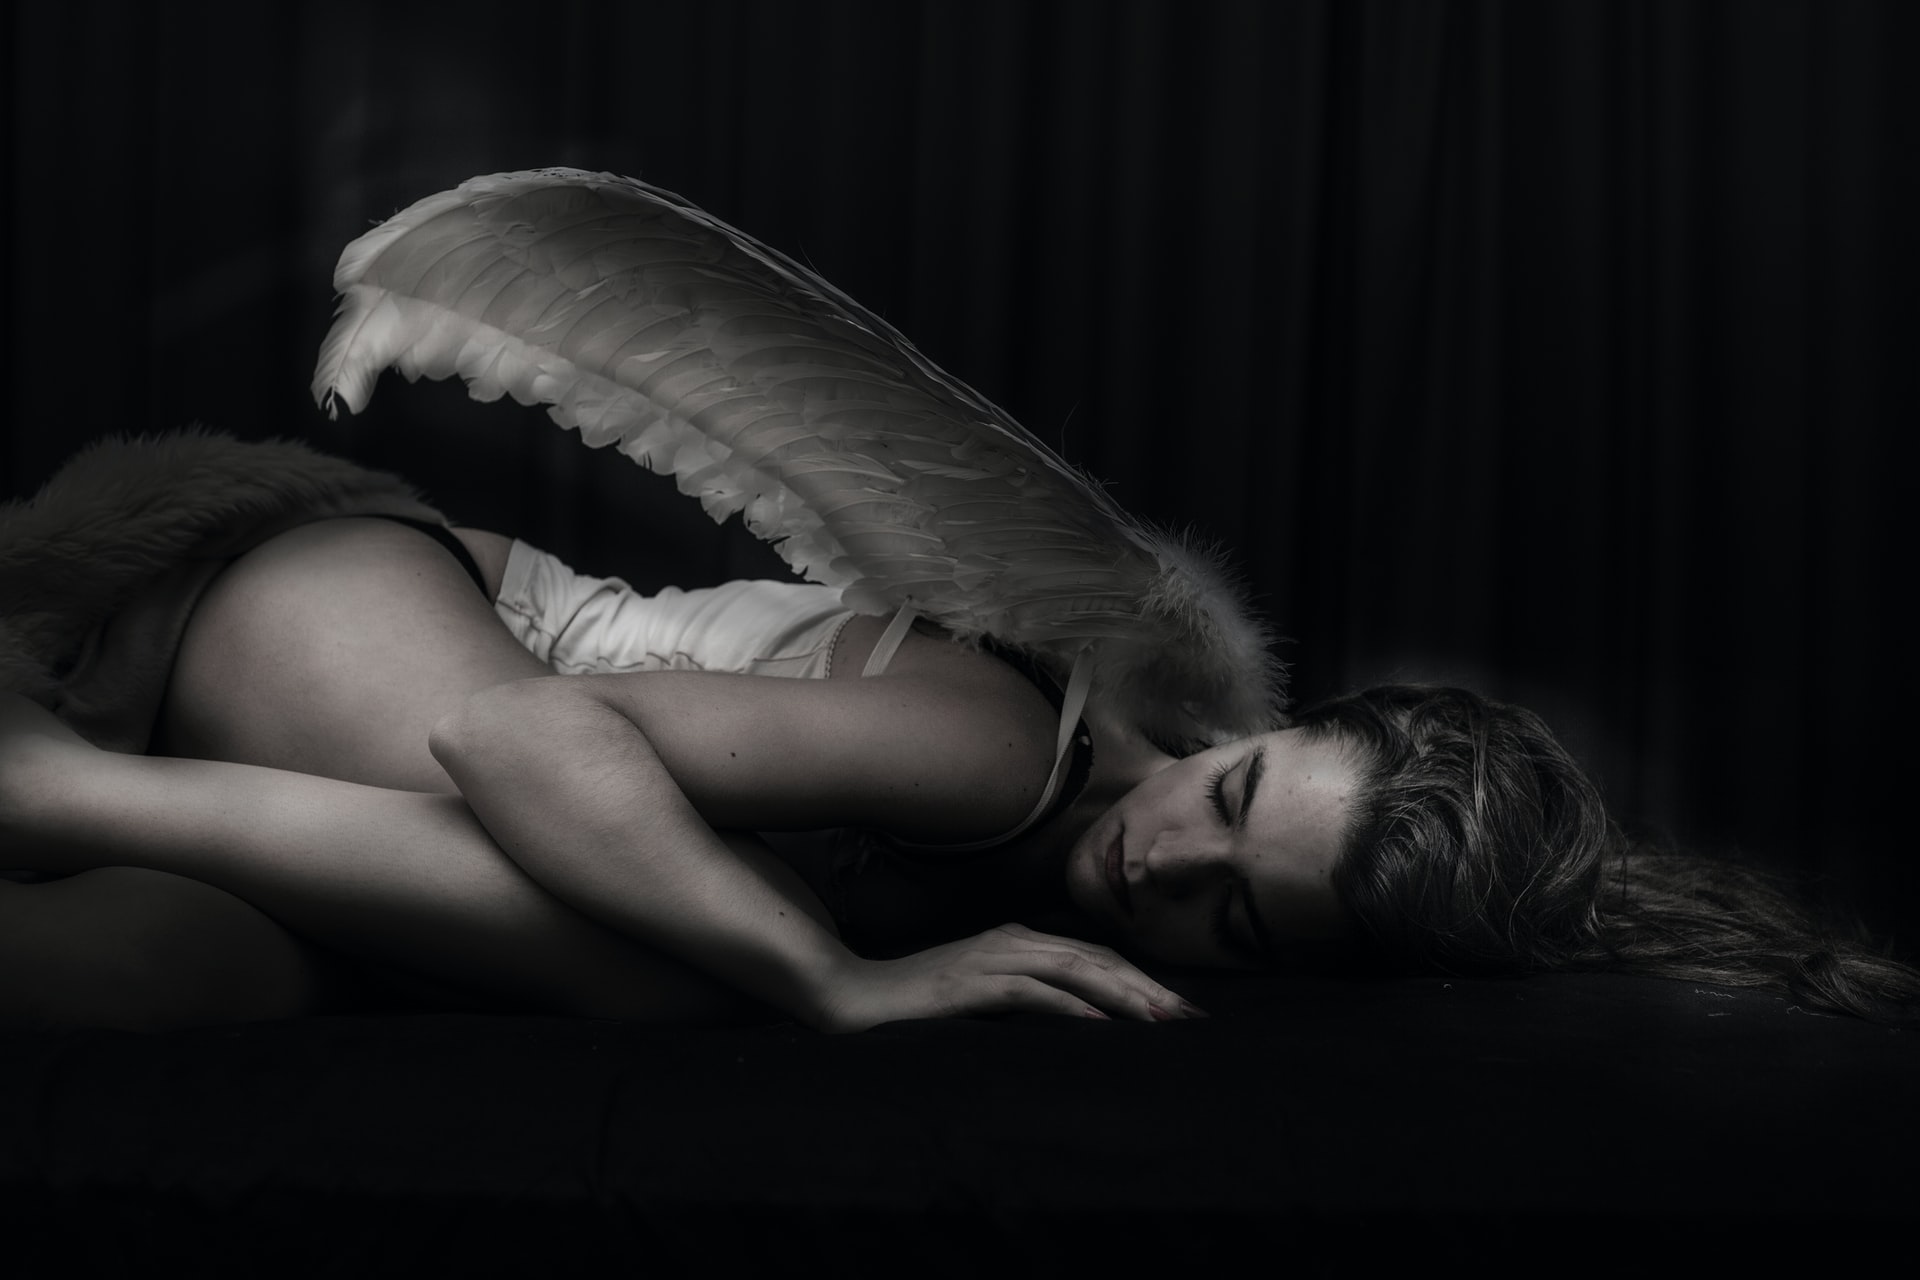 Woman With Wings Lying In A Dark Room